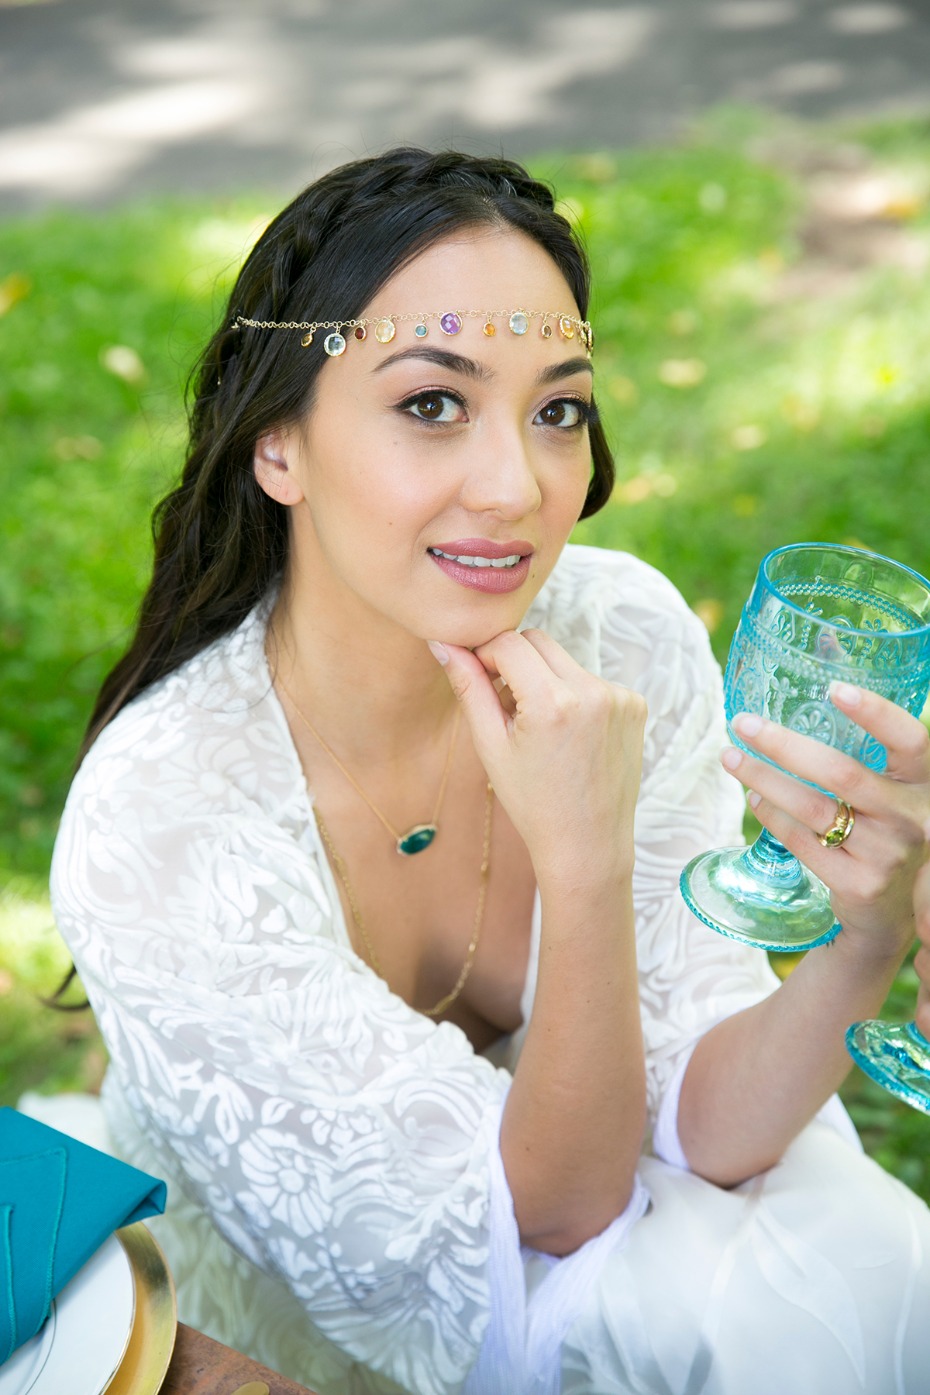 bride with fun and whimsical accessories